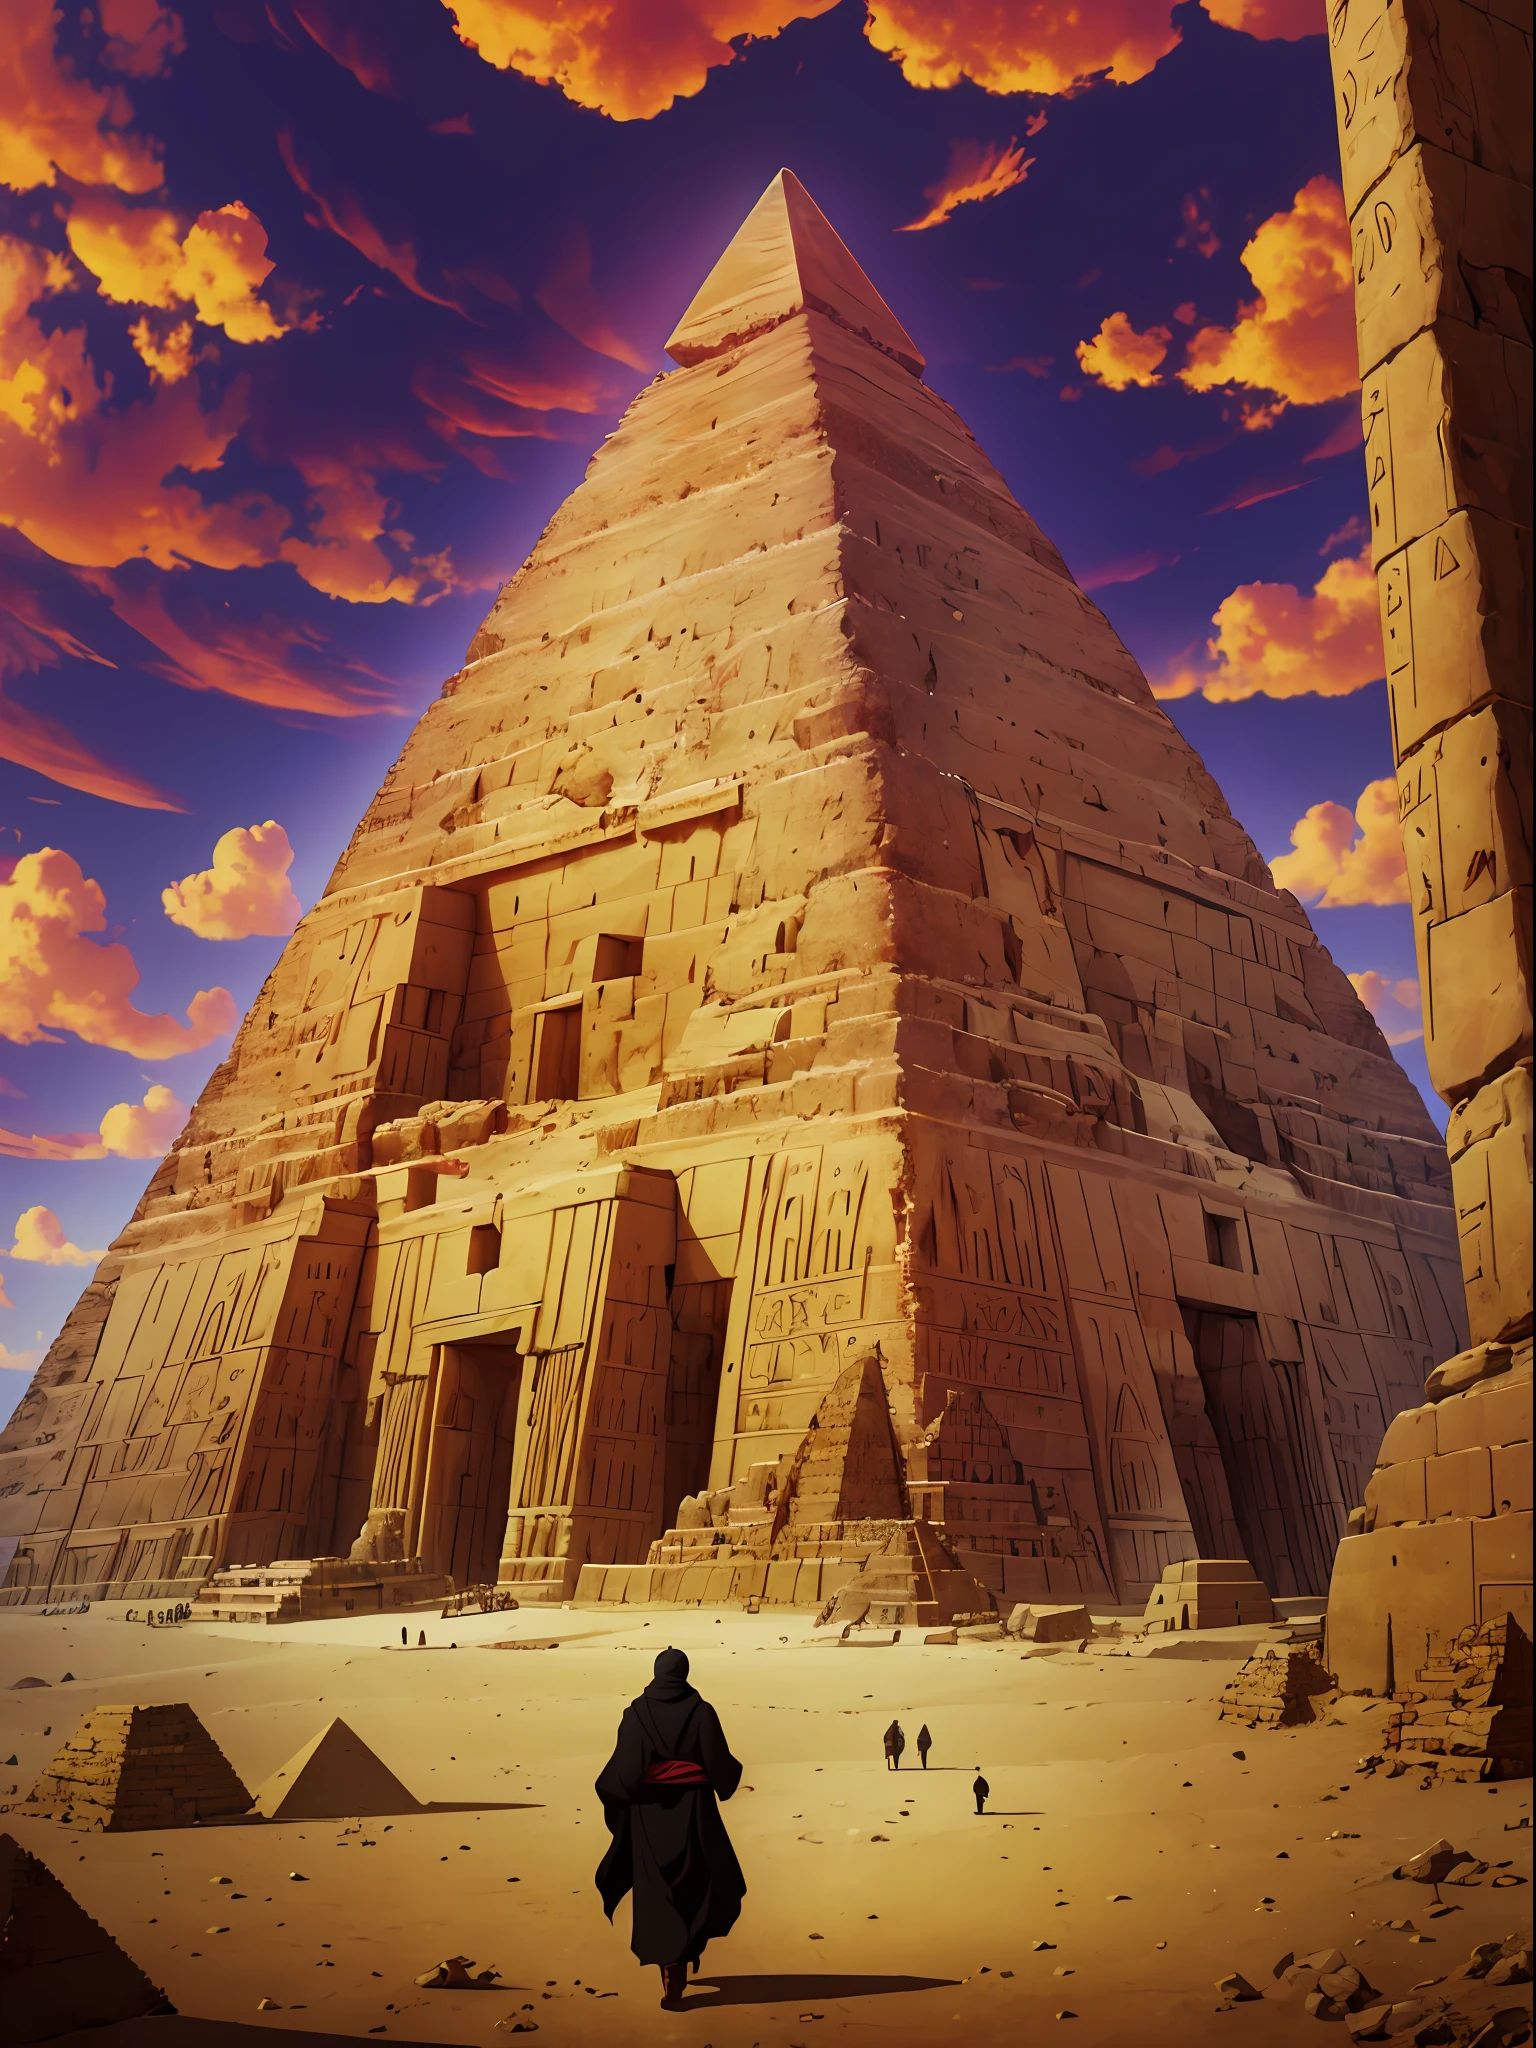 Wandering in the open is given by everyone who lives under the sky
Searches for the mysteries of the Old Testament mentioned inside the Great Pyramid
Do not appear except with the hybrid generator does not see the friend of the diet 
He will prepare himself that he is the wise but his place is blaze